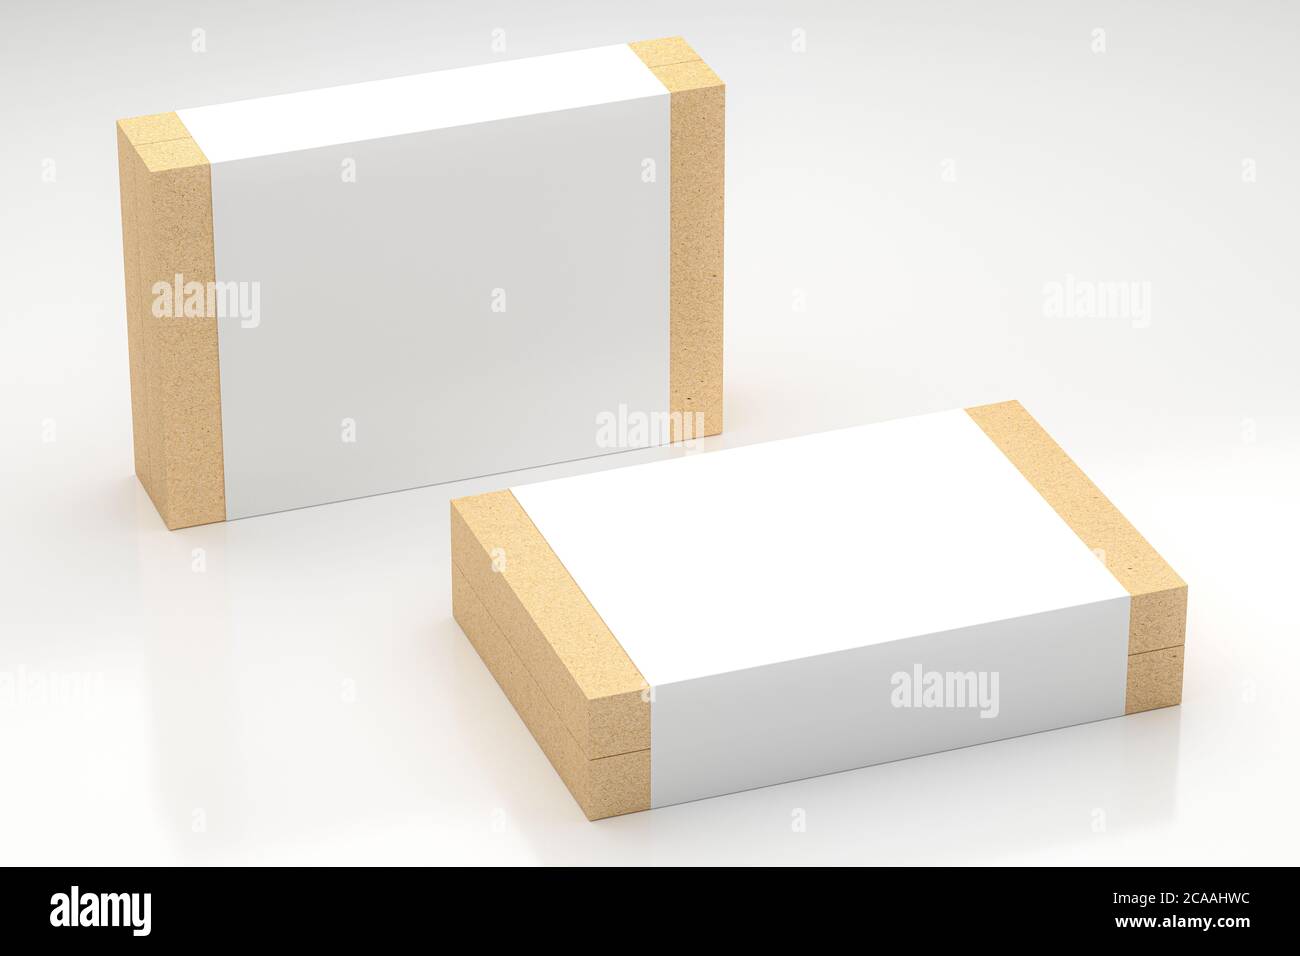 Download Cardboard Mockup High Resolution Stock Photography And Images Alamy